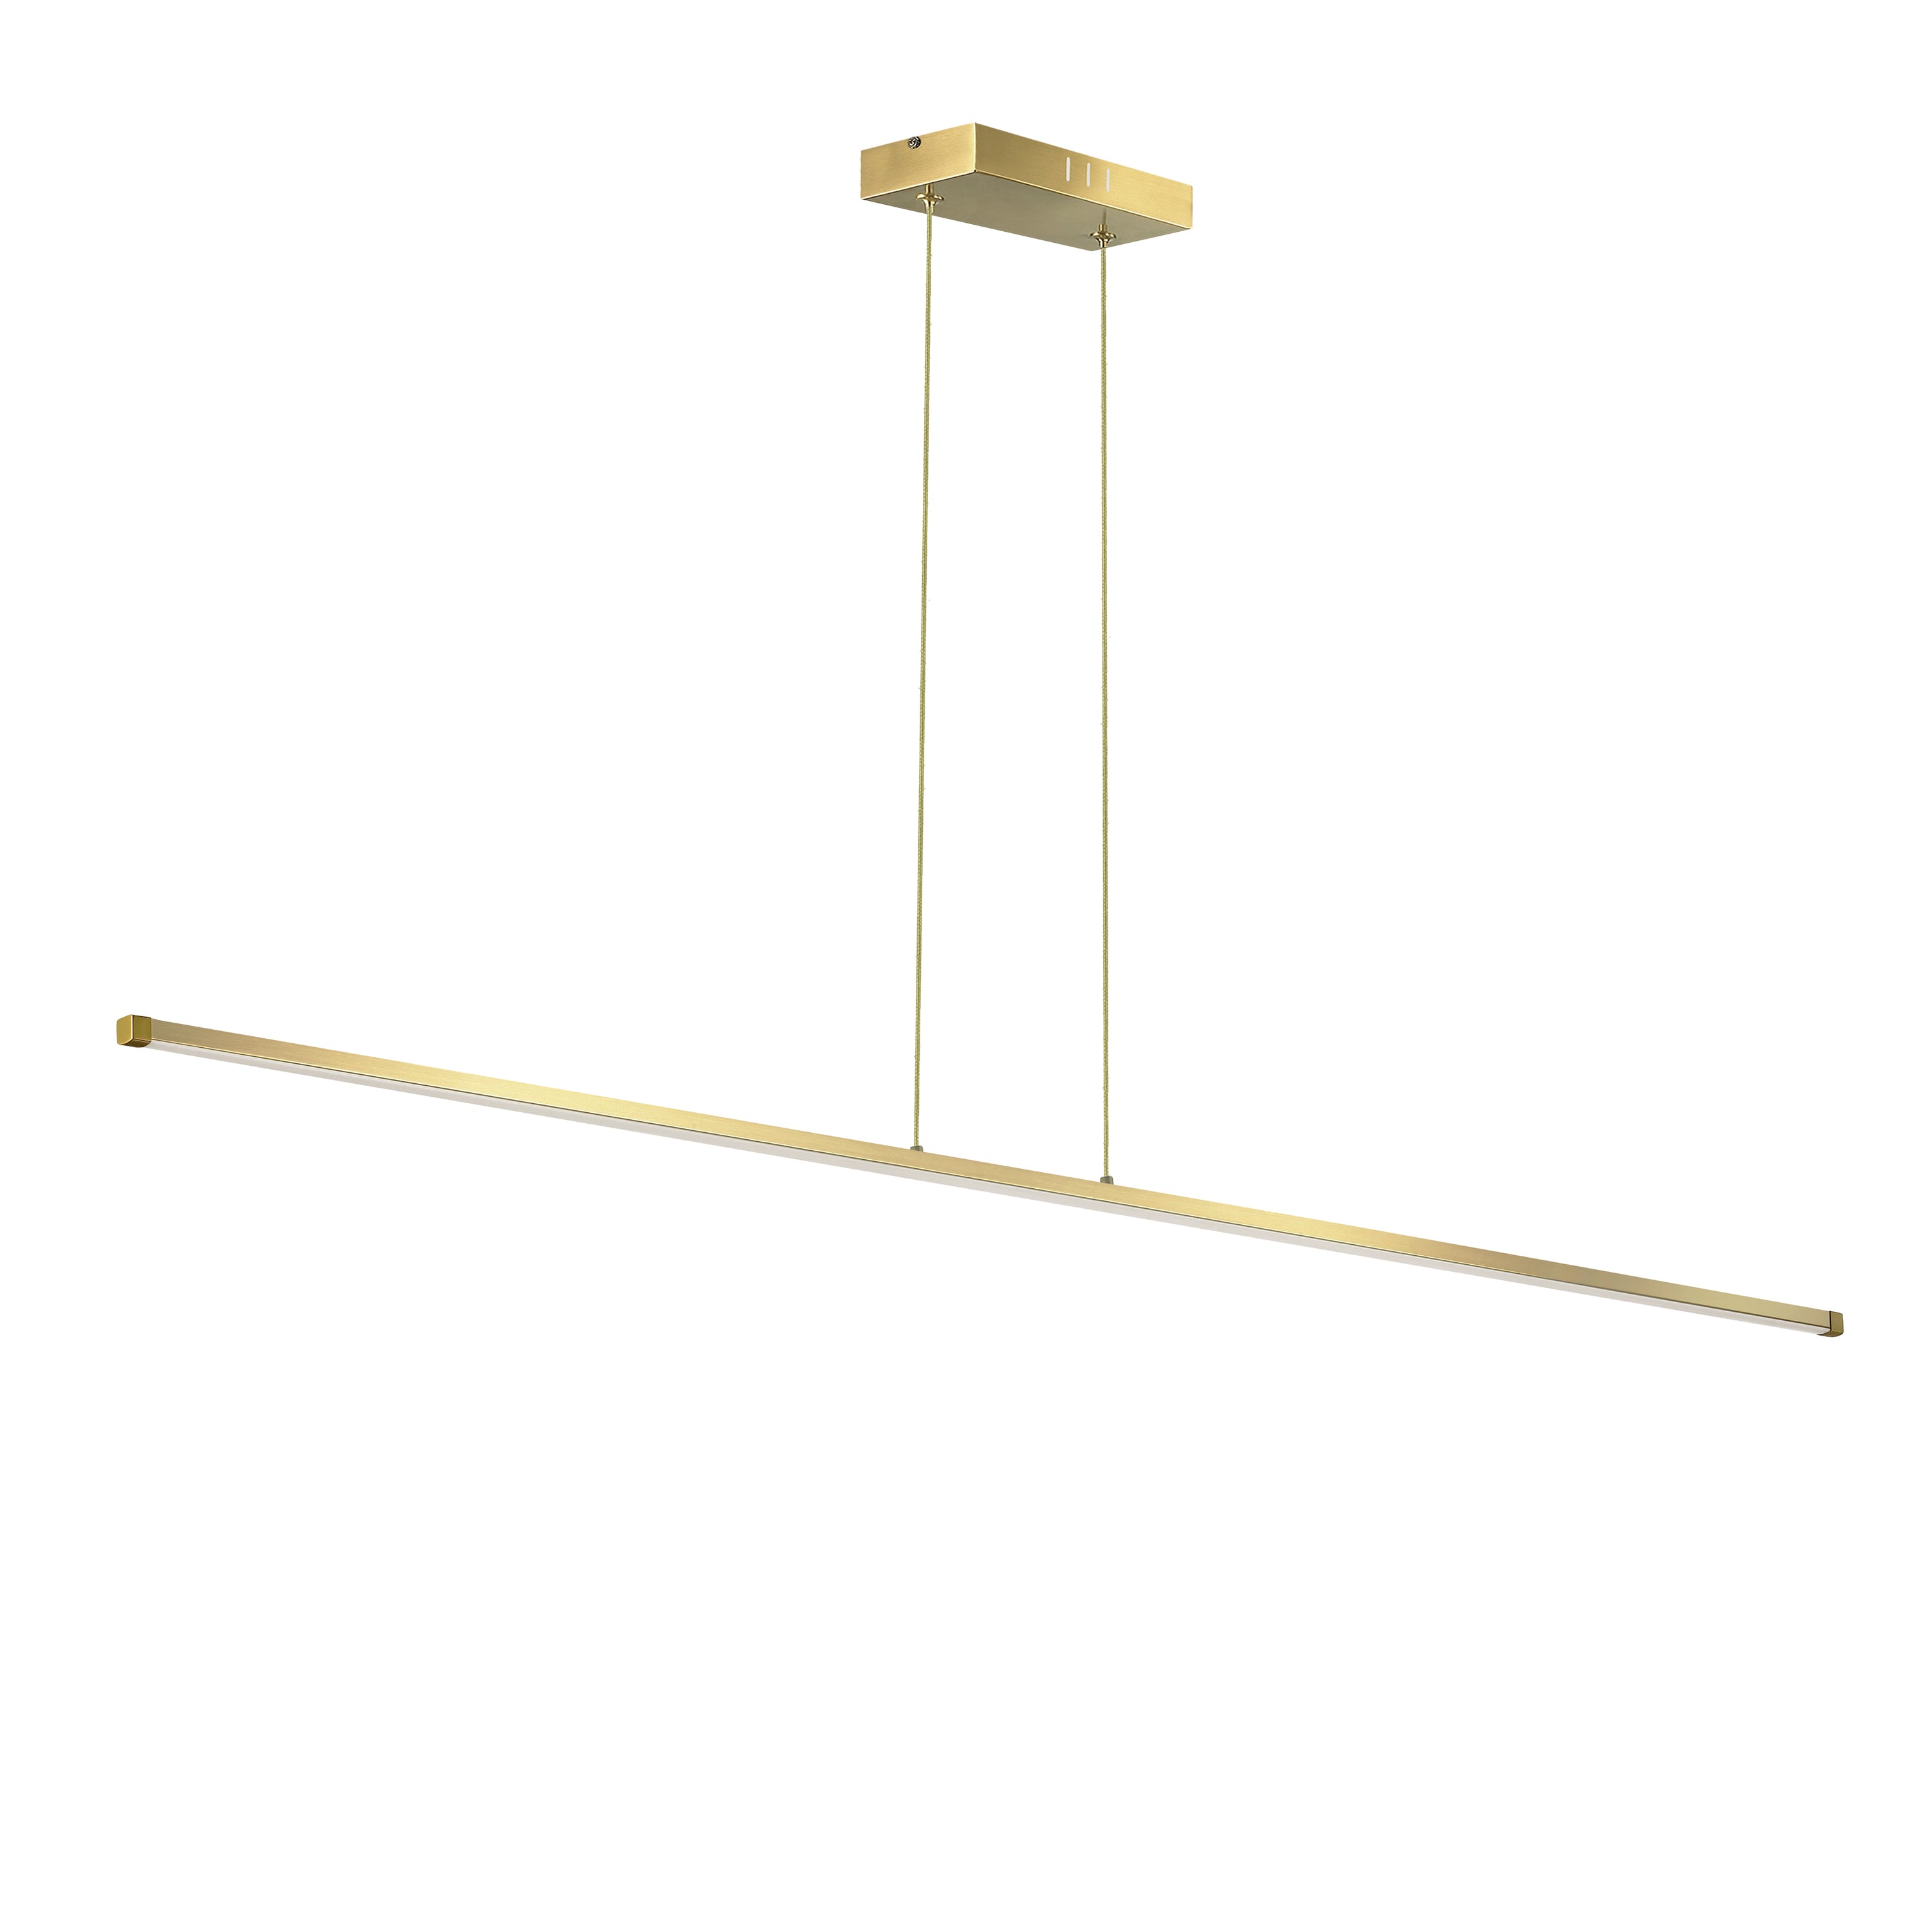 Dainolite Array - ARY-3830LEDHP-AGB - 30W Horizontal Pendant, Aged Brass with White Acrylic Diffuser - Aged Brass